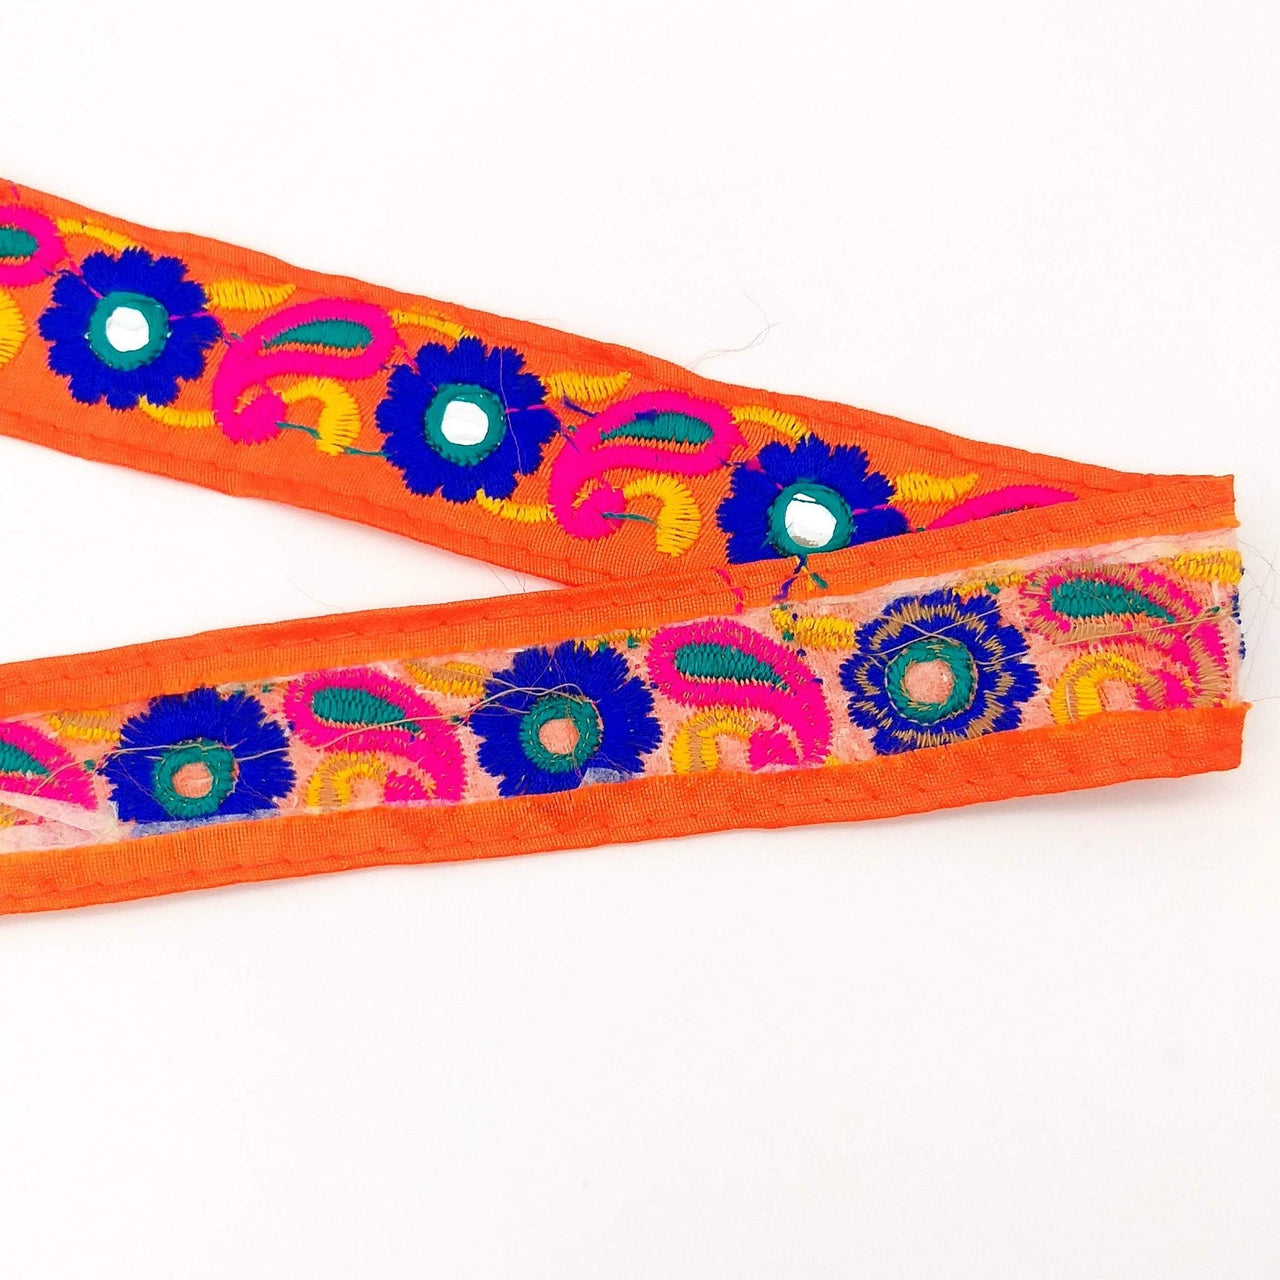 Orange Floral Mirrored Trim With Royal Blue Flowers And Fuchsia Pink Paisley Embroidery, Decorative Trimming, Trim By 3 Yards